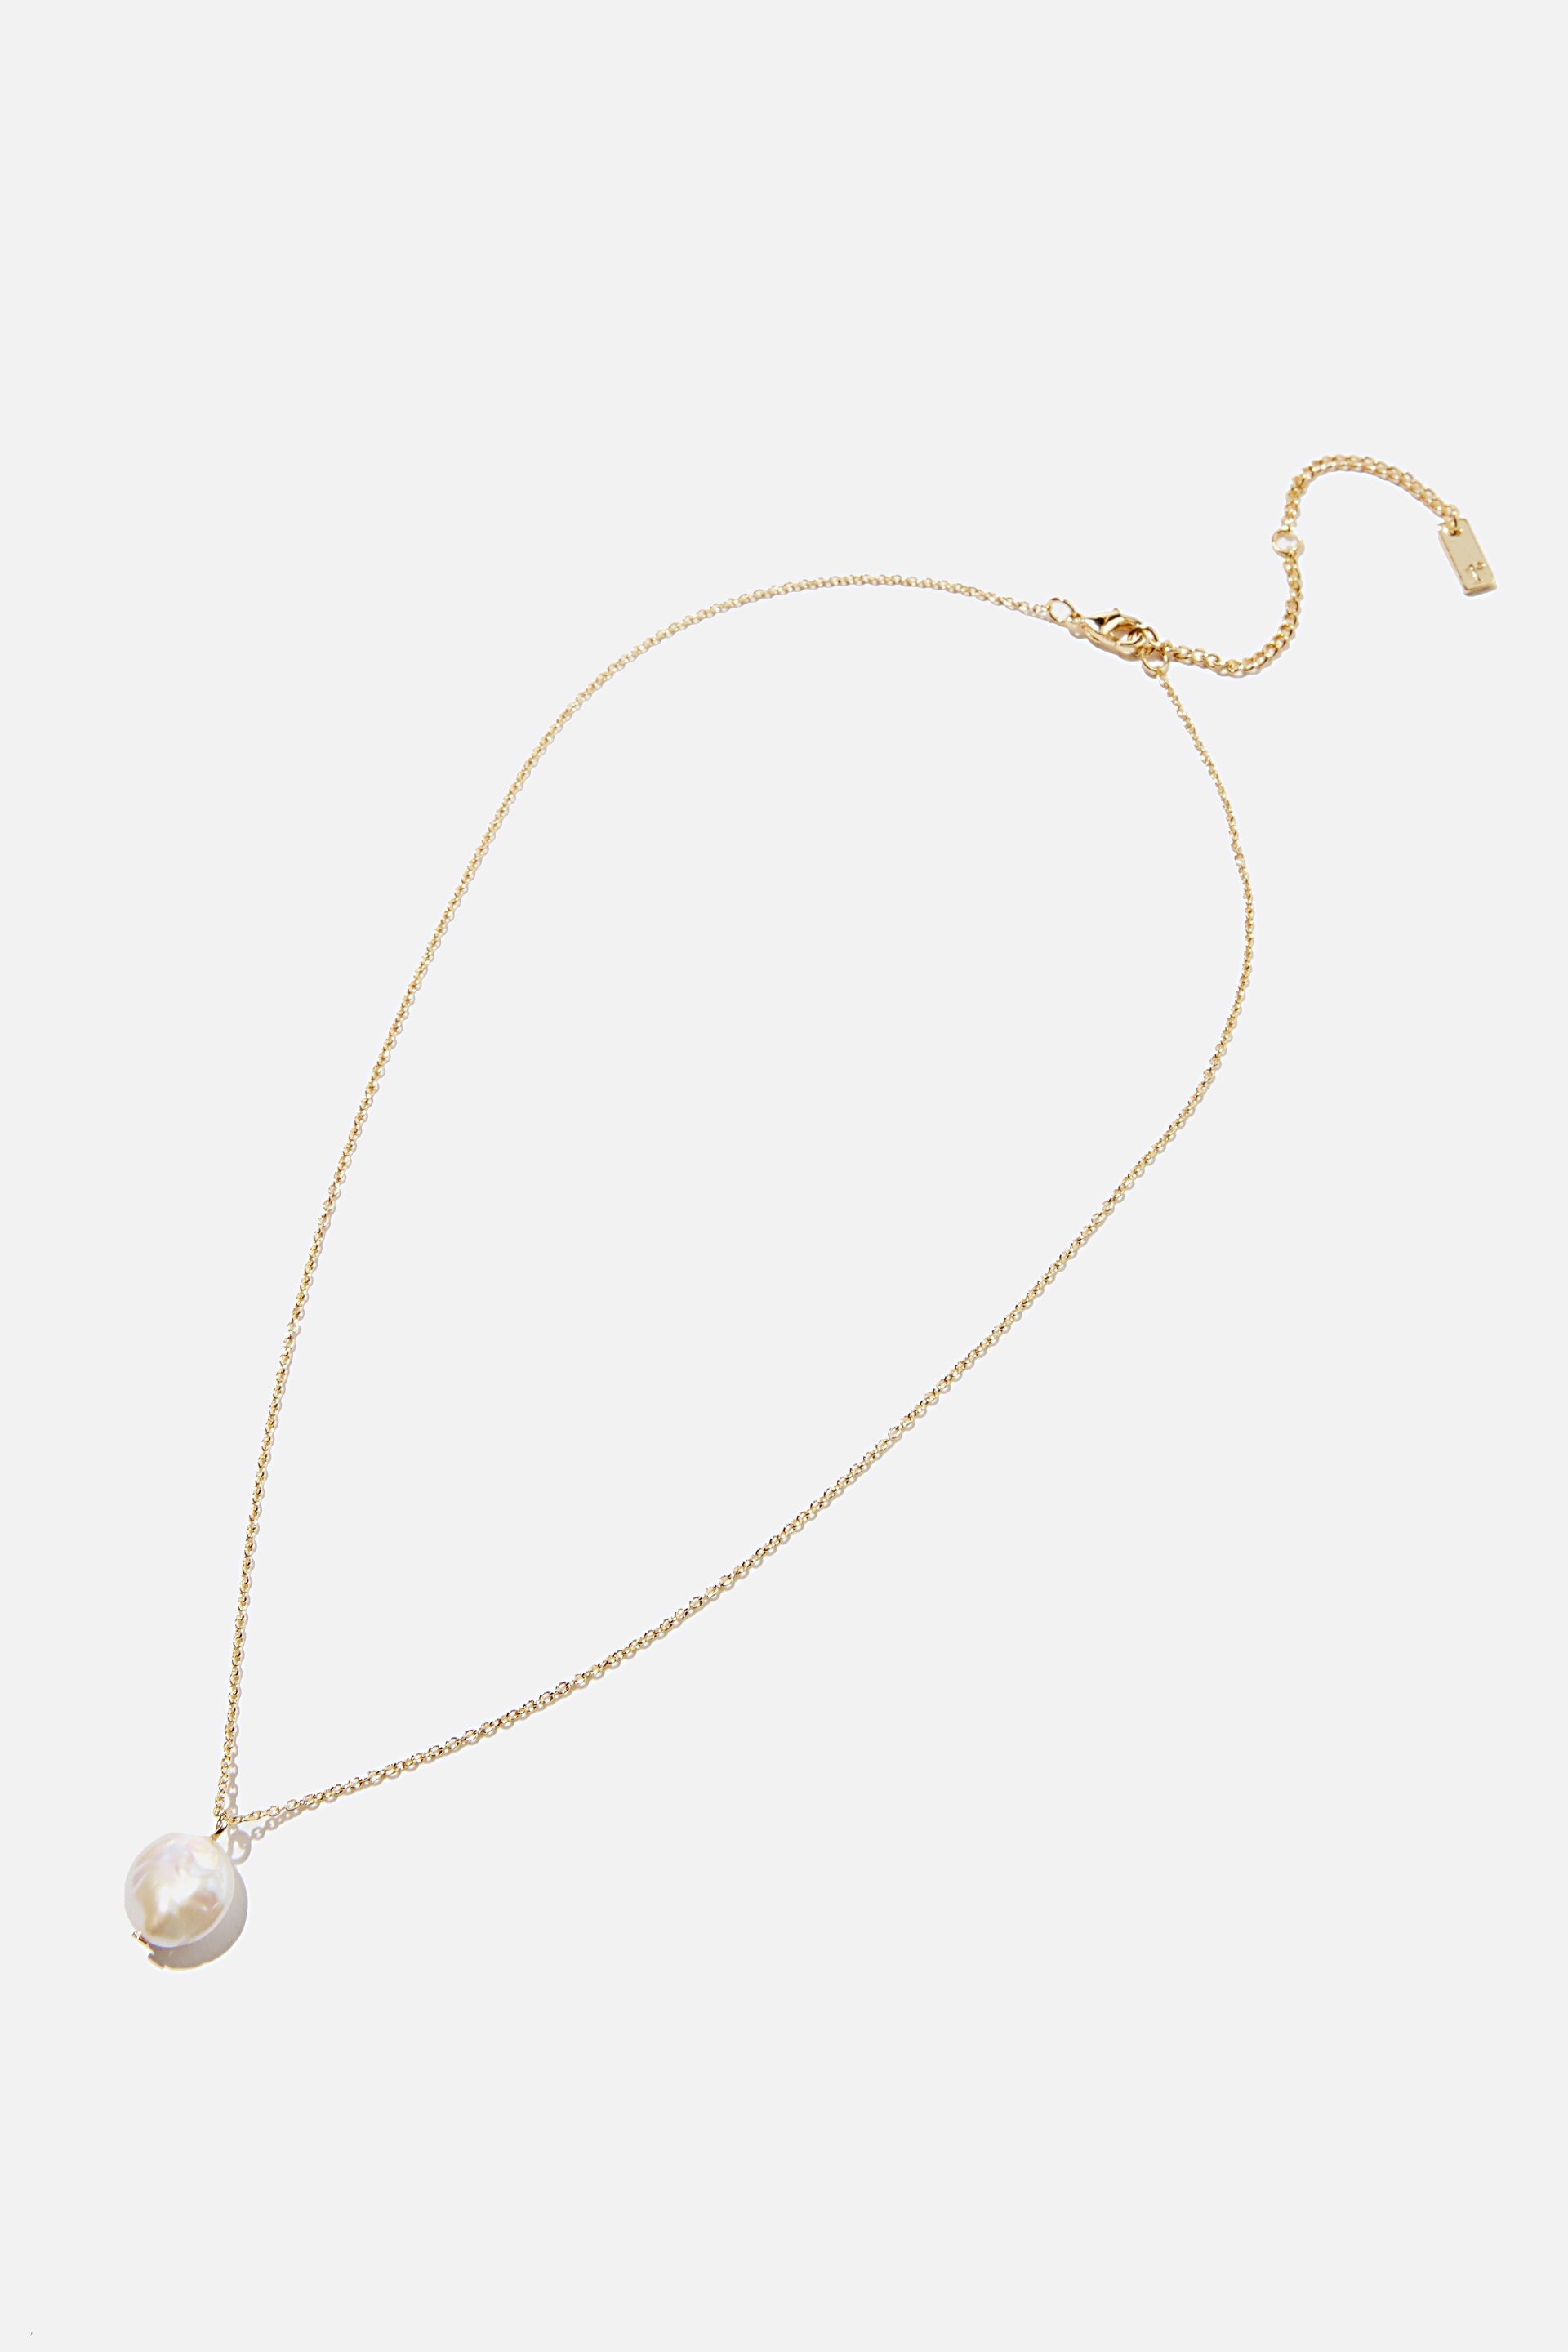 Rubi - Premium Pendant Necklace - Gold plated freshwater pearl